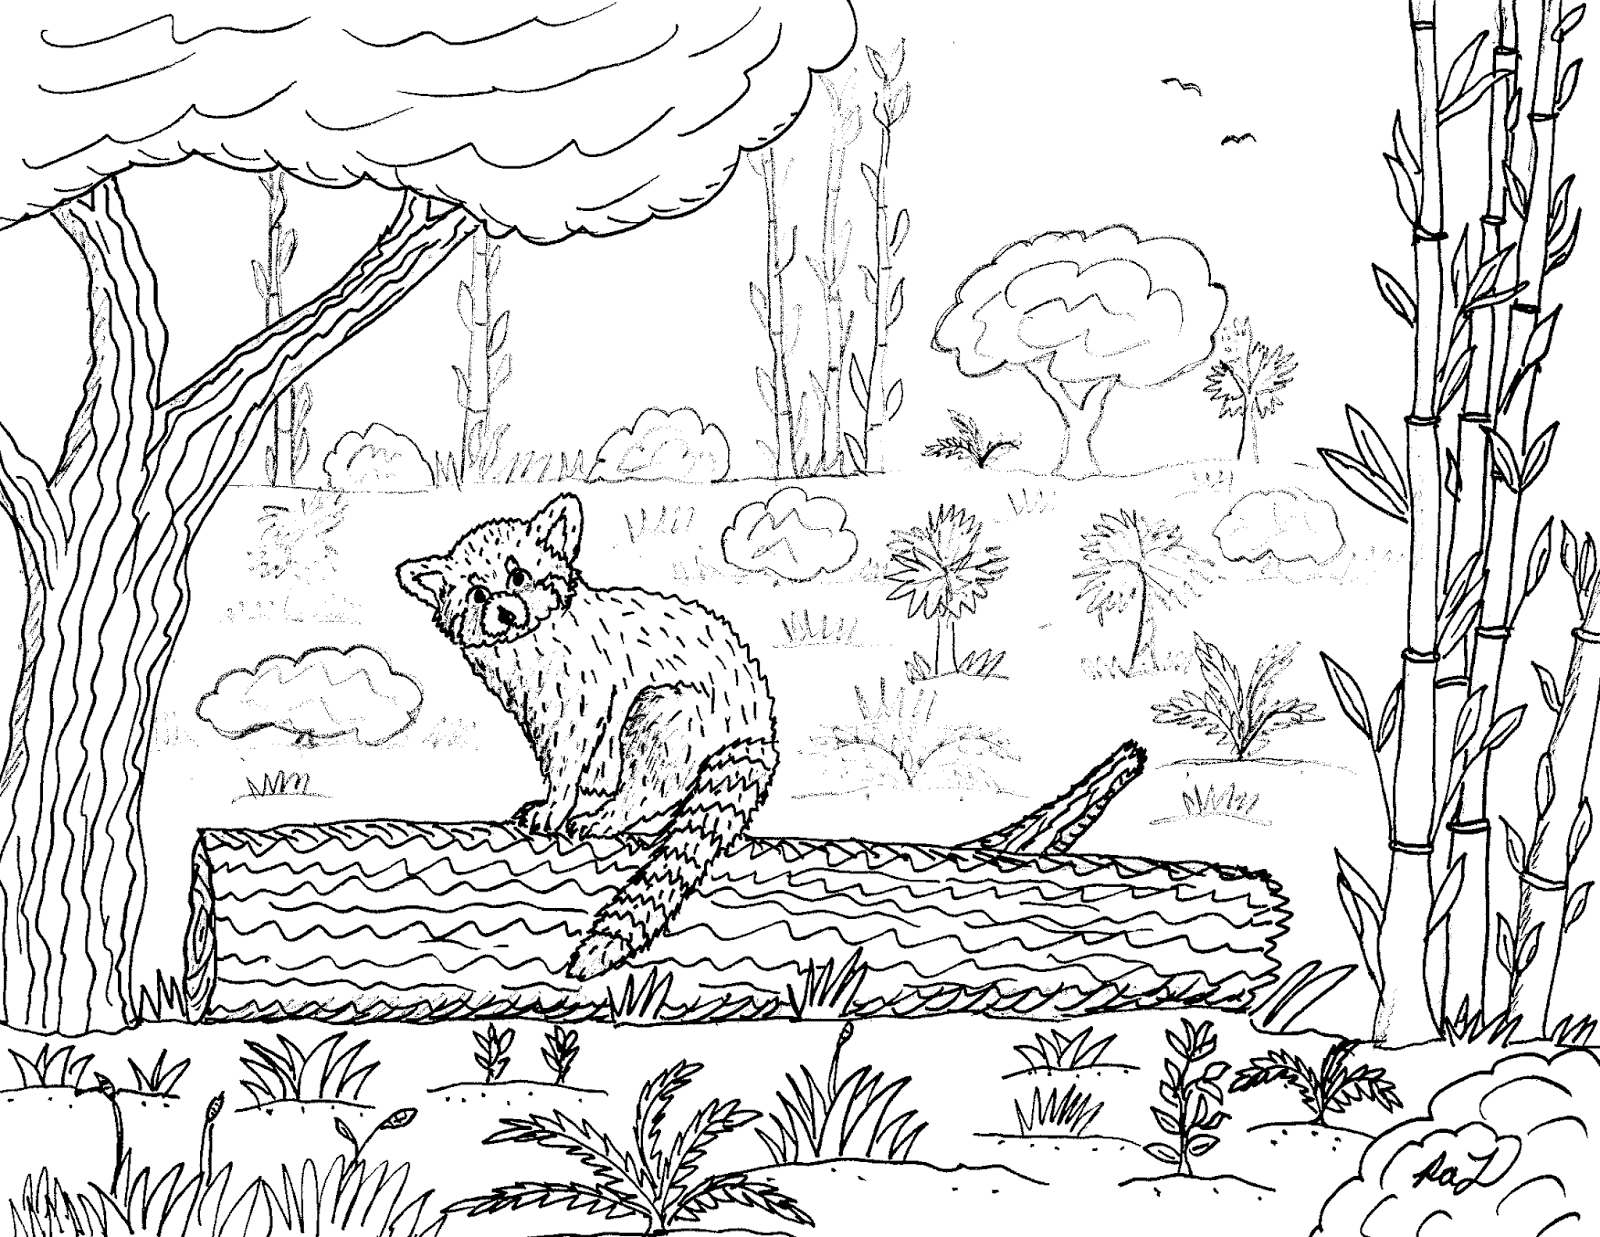 Robin's Great Coloring Pages: Red Panda